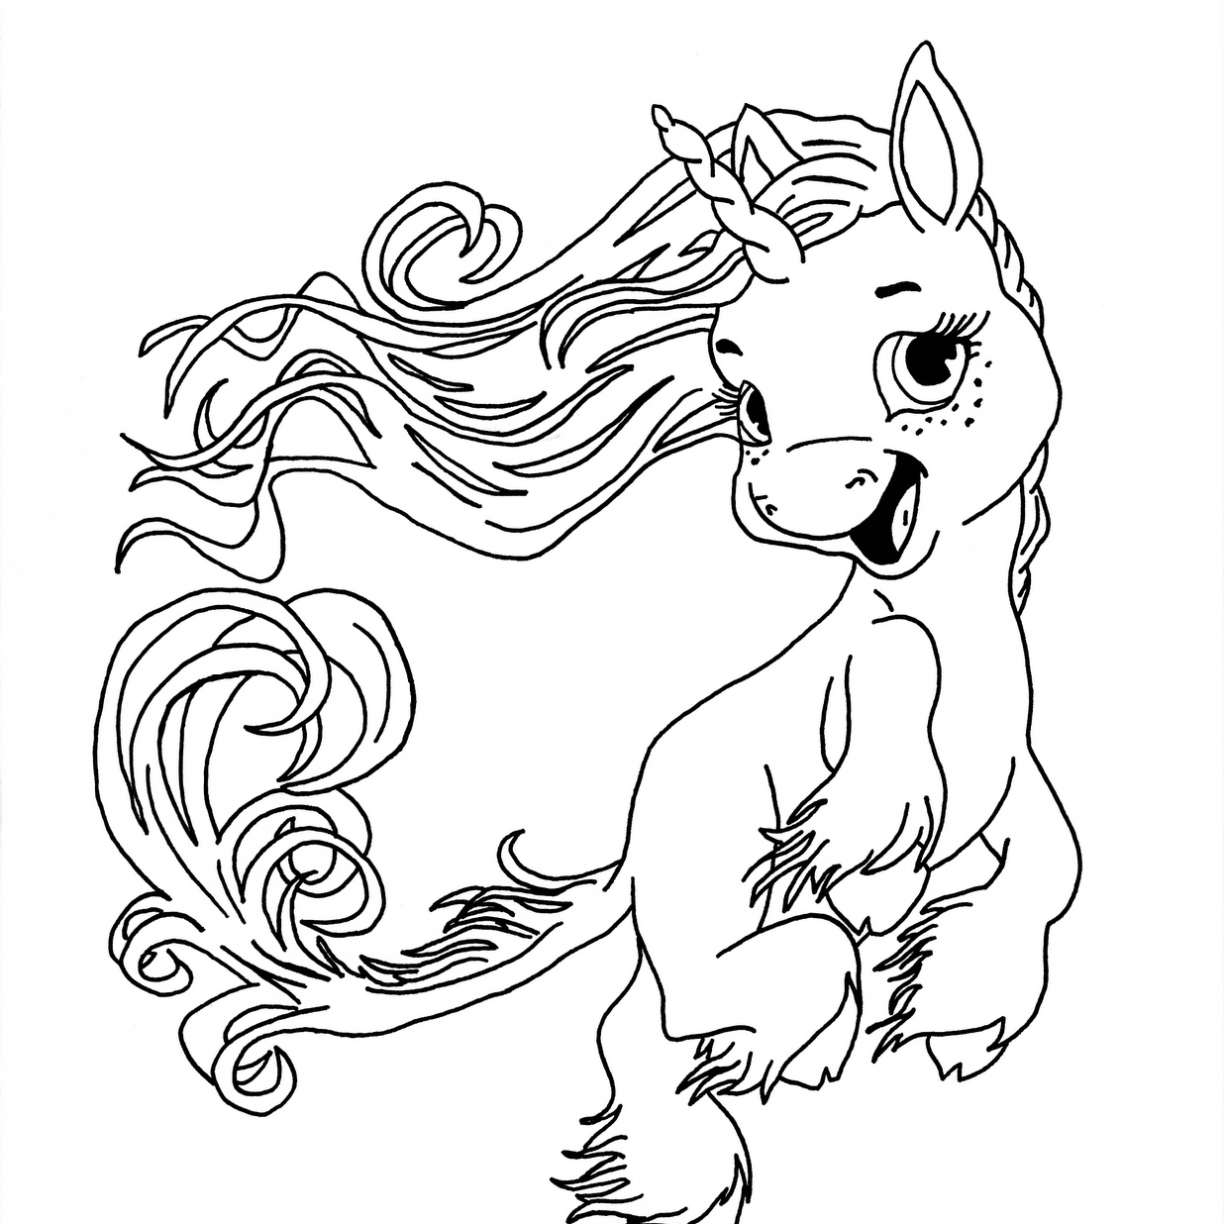 My Little Pony Unicorn Drawing at GetDrawings.com | Free for personal